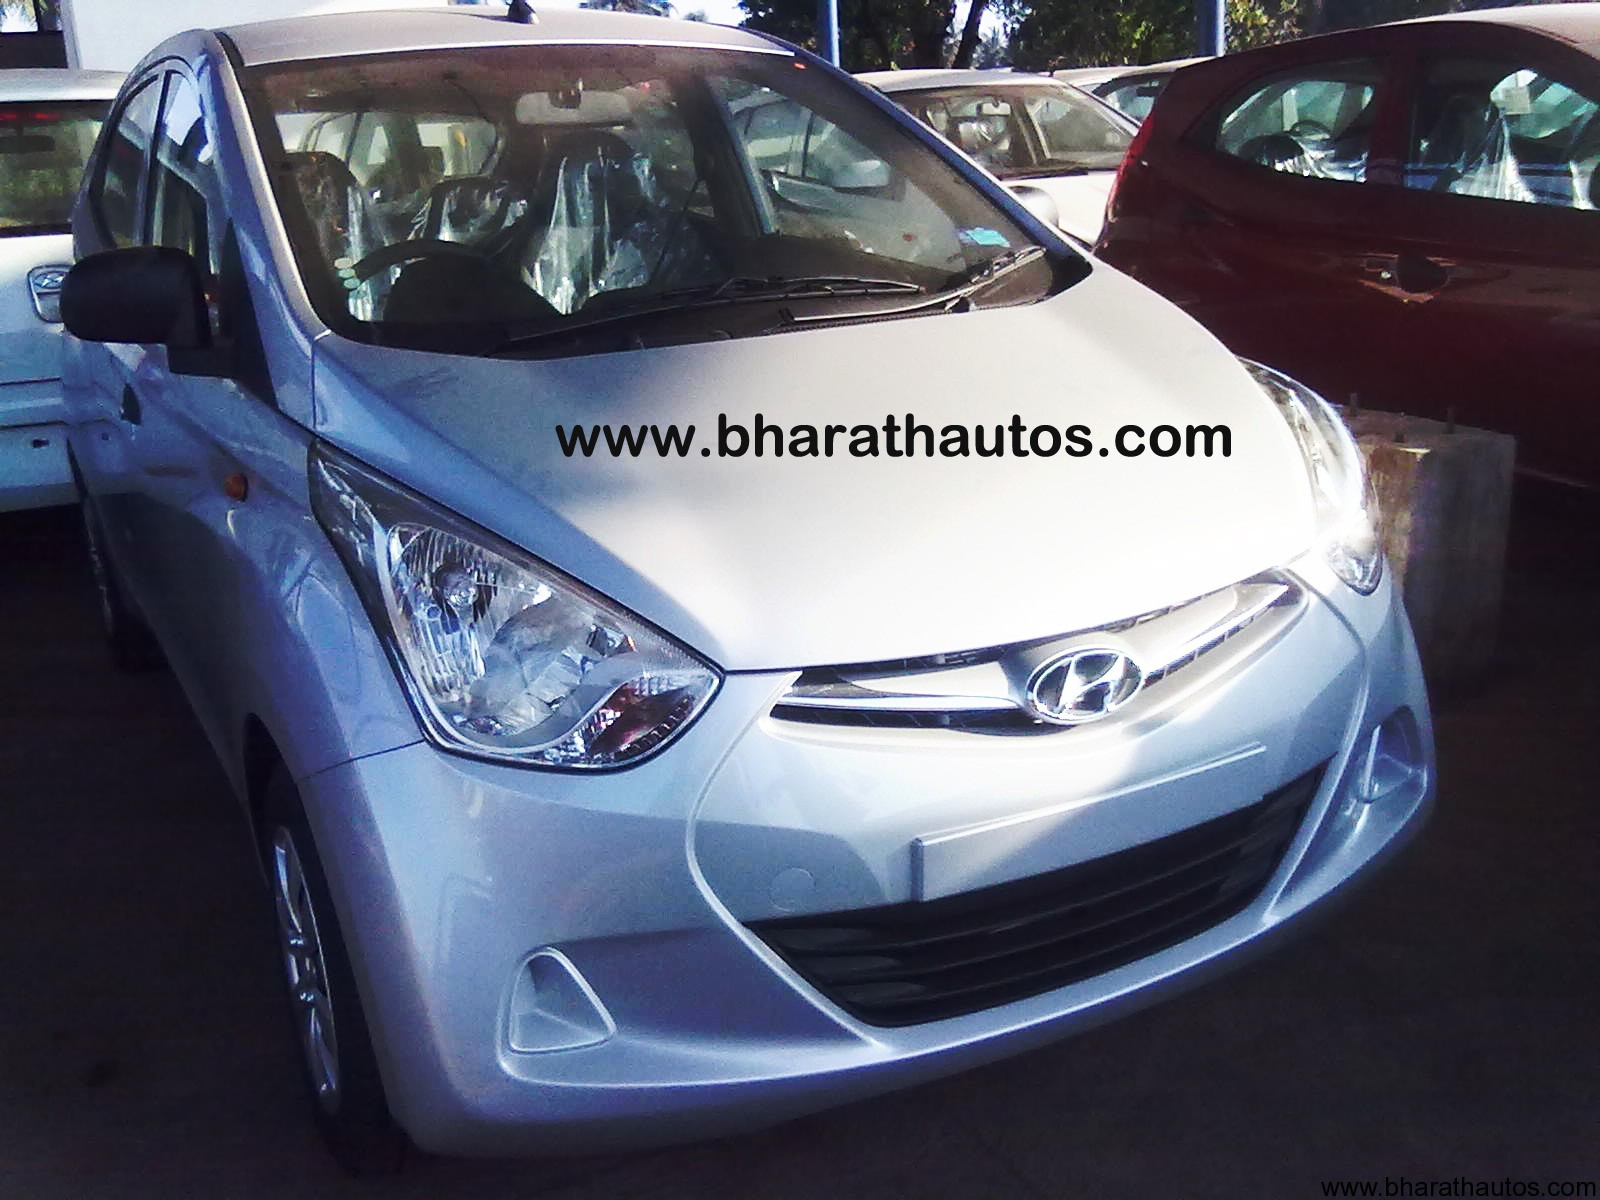 Spied - Hyundai Eon dropped camouflage in Mangalore with complete details